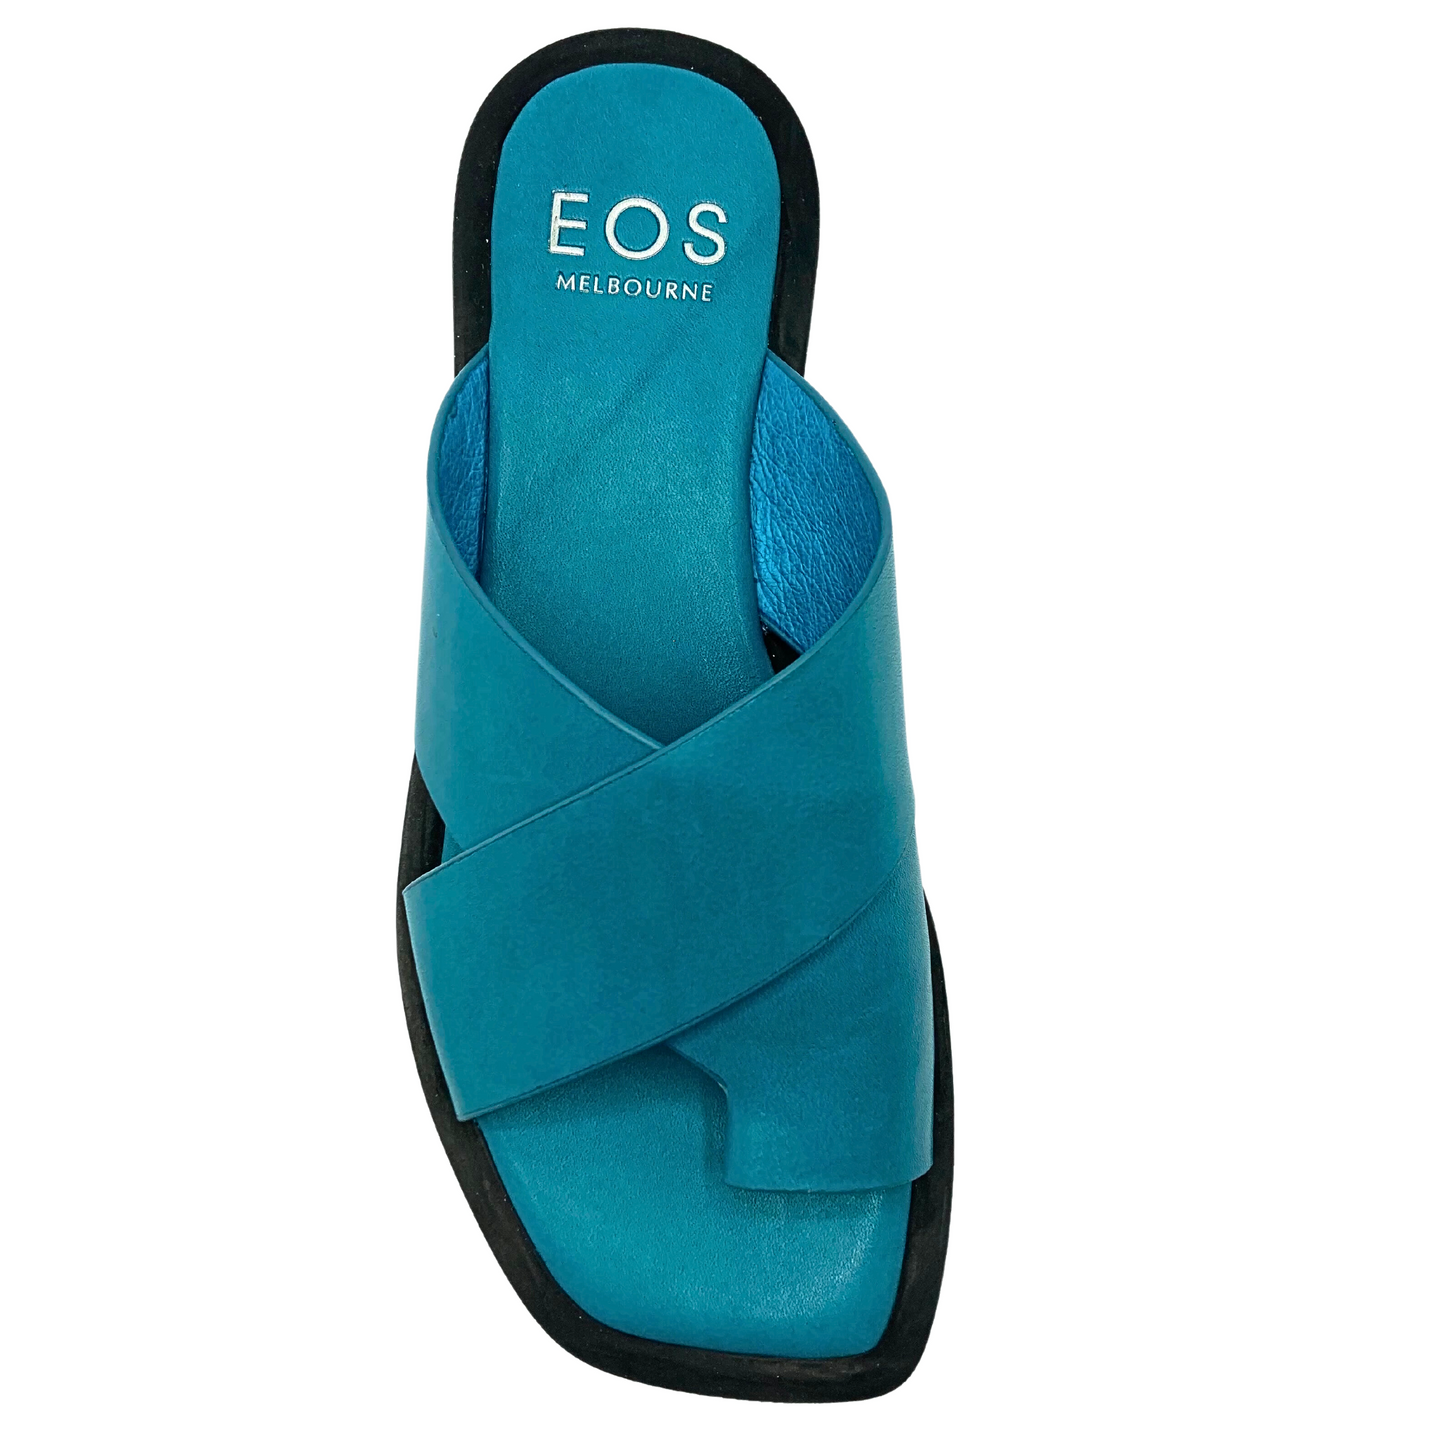 Top down view of a flat, blue leather sandal.  Black extended sole wraps up to provide a design element.  Cross straps and toe sleeve